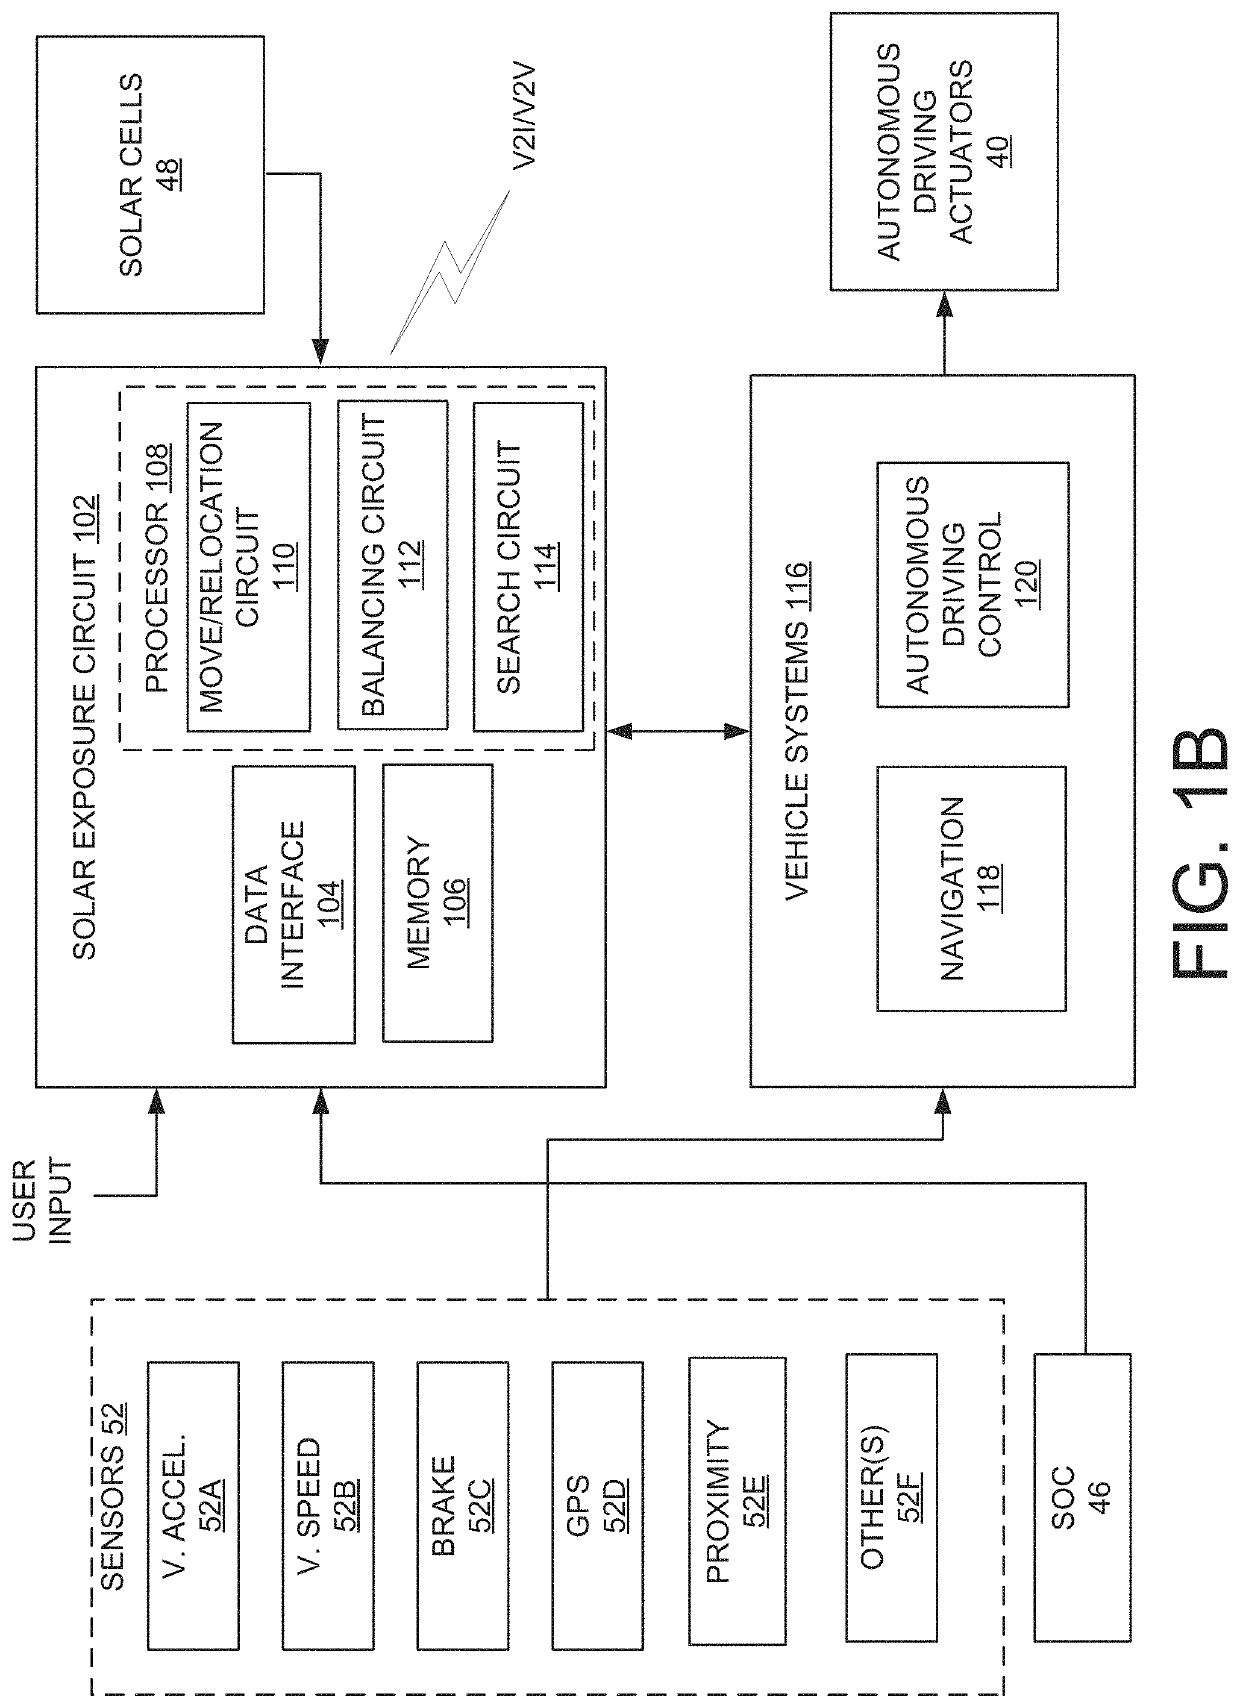 Systems and methods of autonomous solar exposure